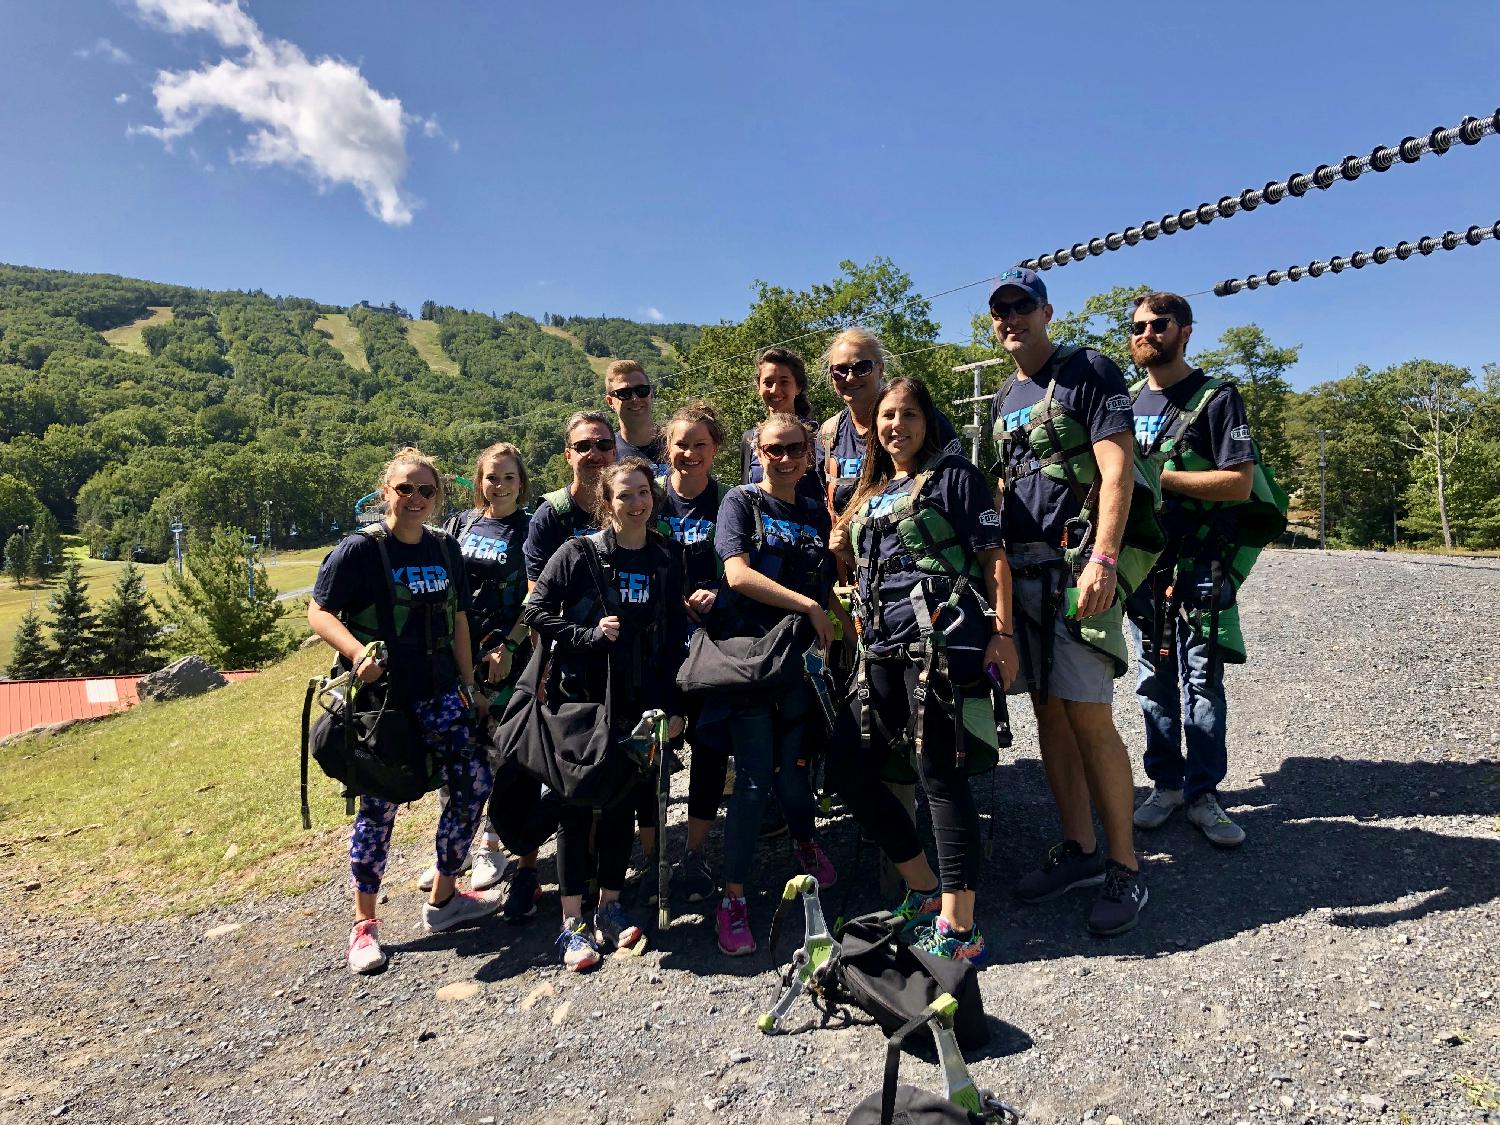 One of our Team Days zip lining down Pennsylvania's longest zip line!